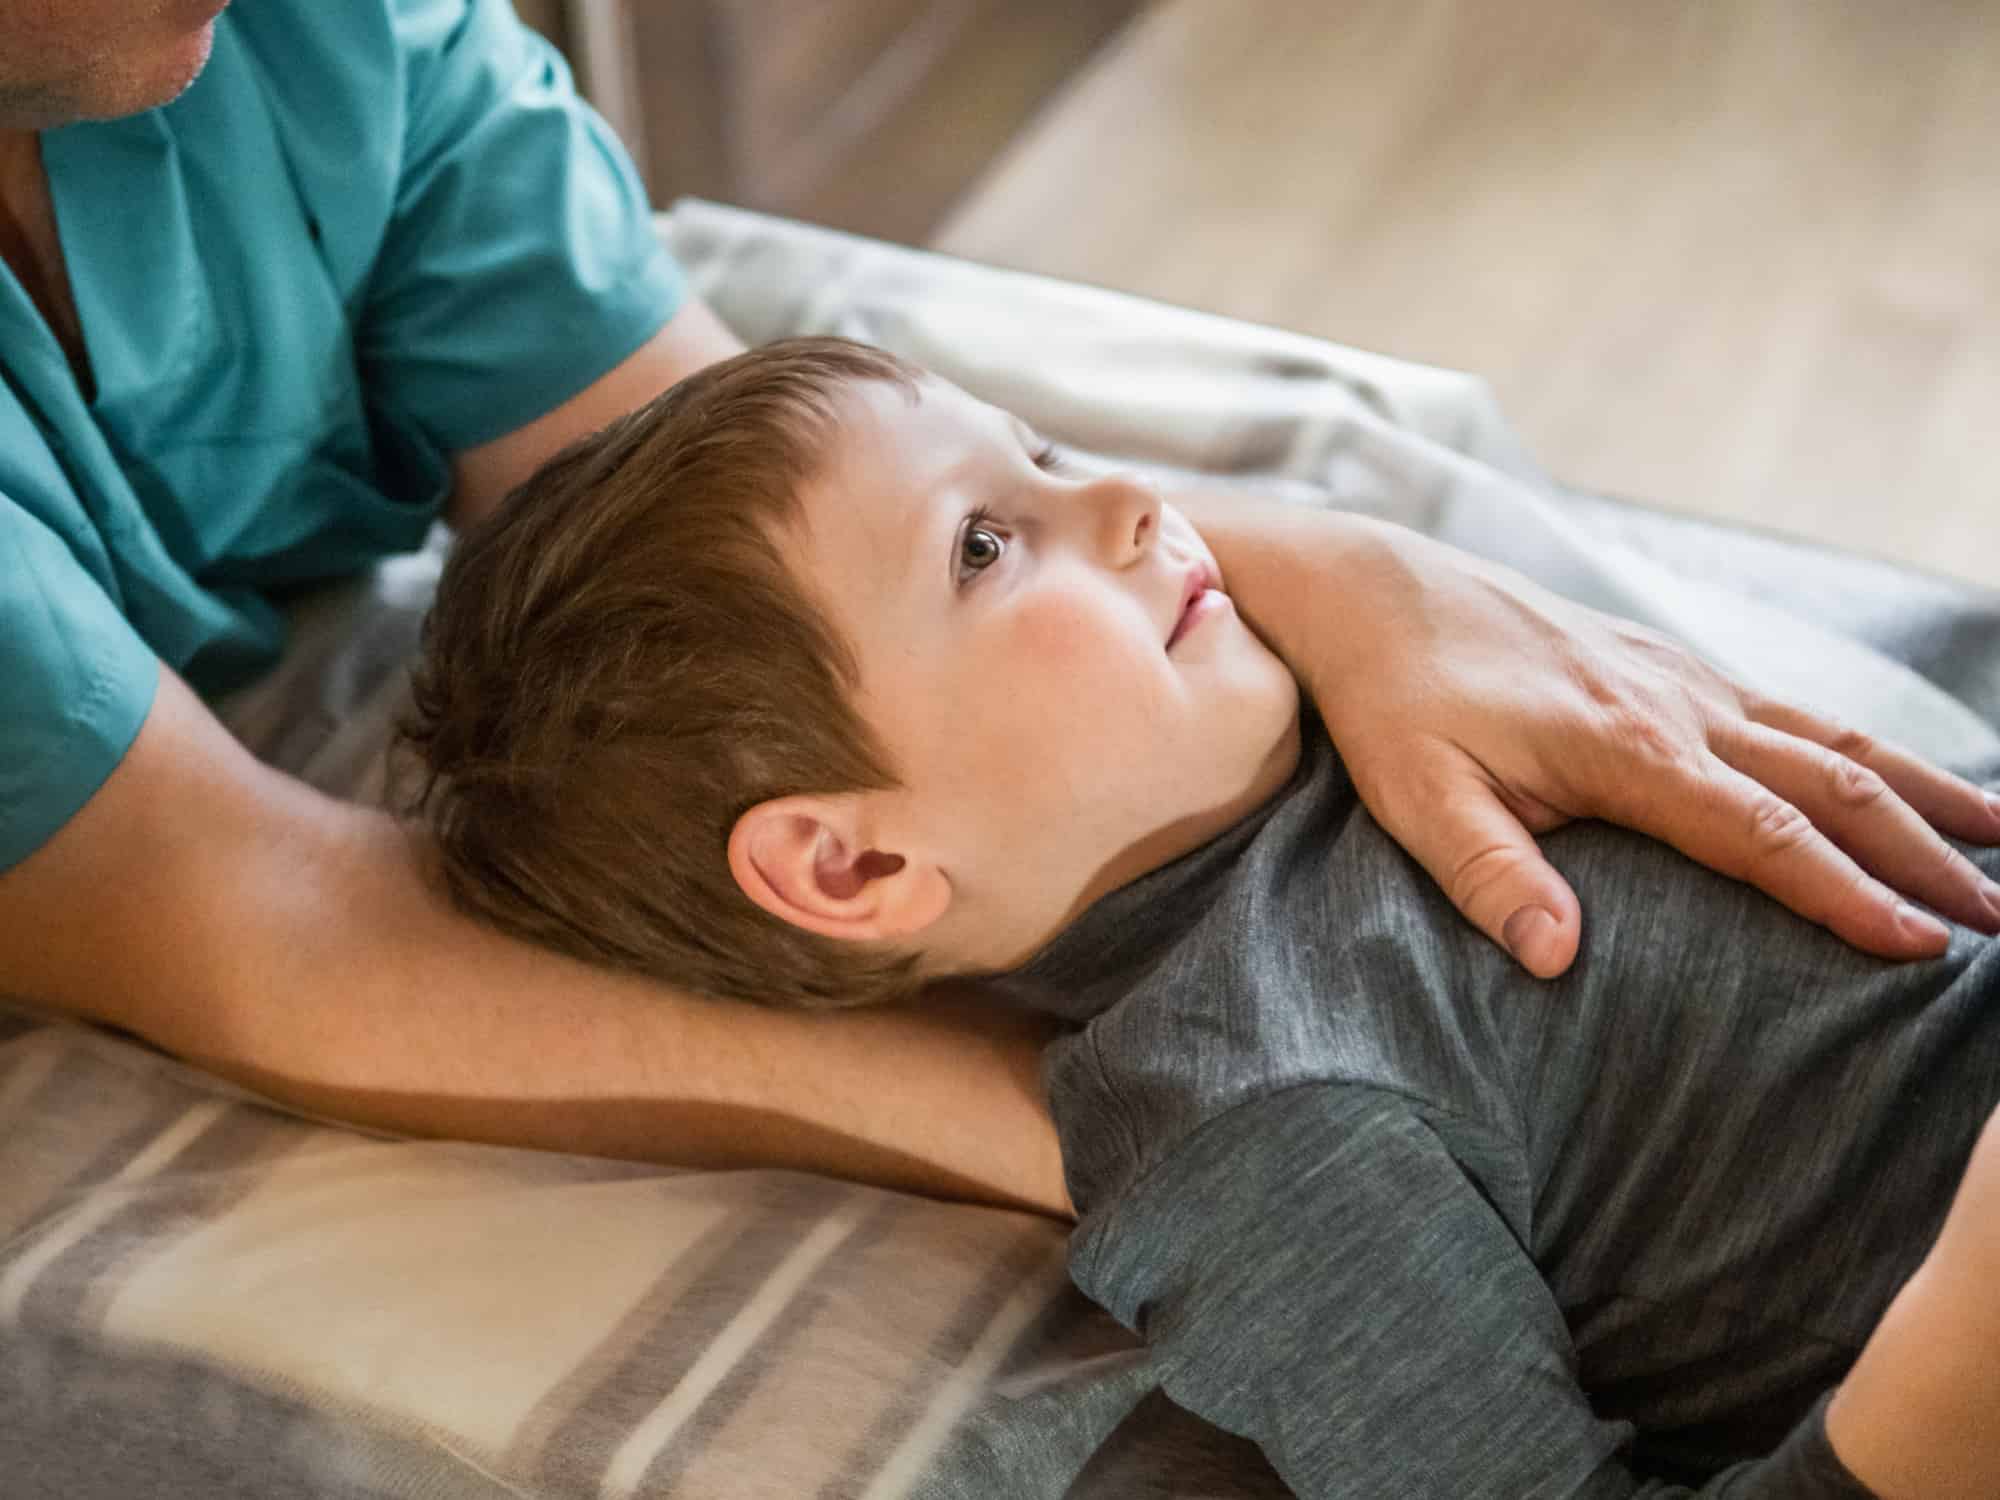 Bed-Wetting Helped by Chiropractic - Research Evaluated Chiropractic for Kids